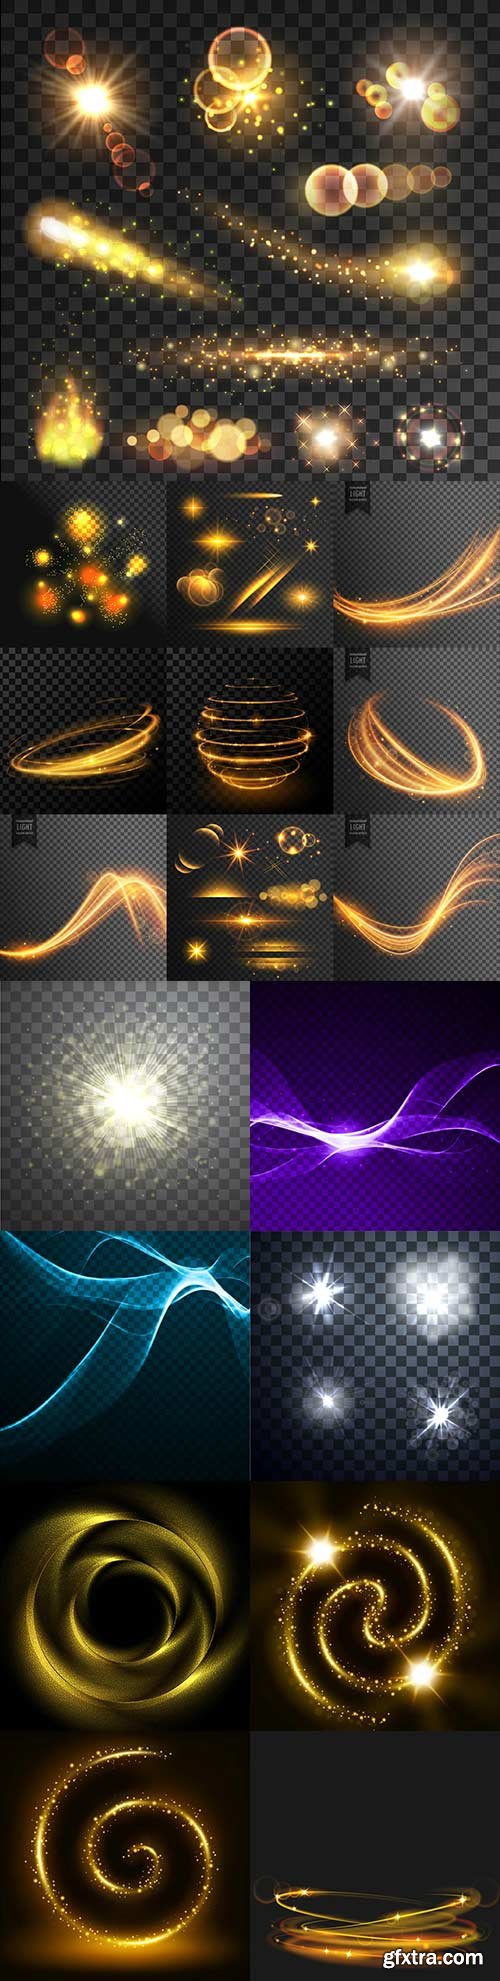 Glowing abstract vector backgrounds